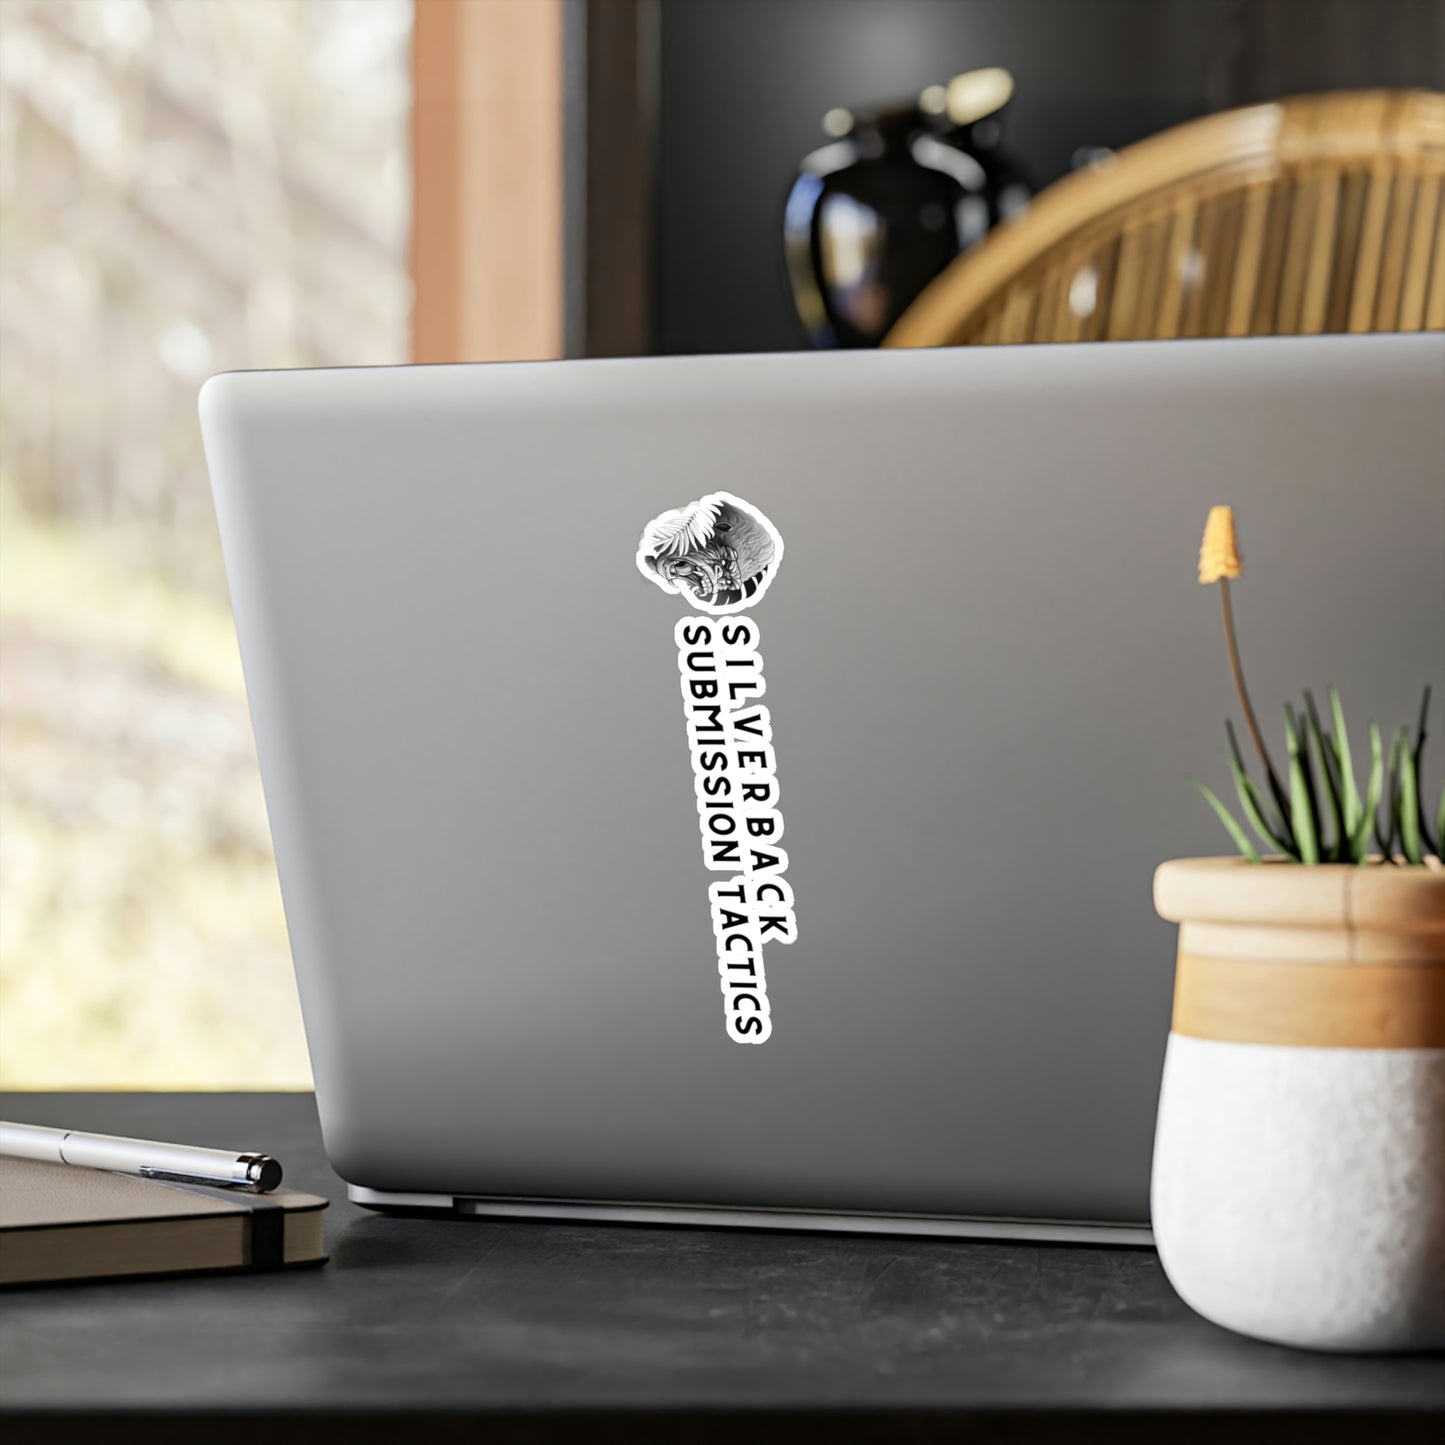 Silverback Submission Tactics Vinyl Decal